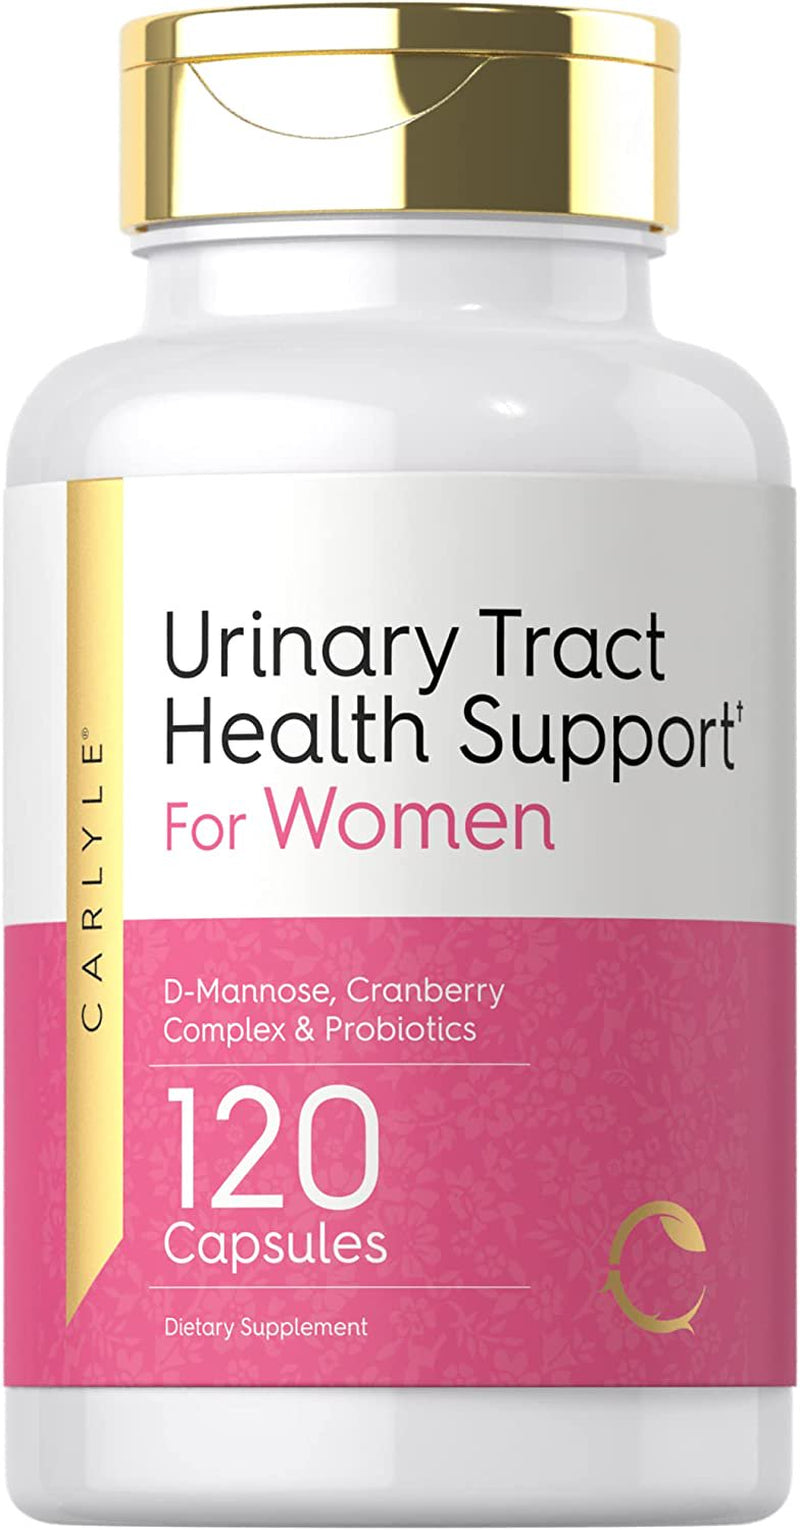 Urinary Tract Health for Women | 120 Capsules | Relief for Women | with D-Mannose, Cranberry Complex & Probiotics | Non-Gmo, Gluten Free | by Carlyle